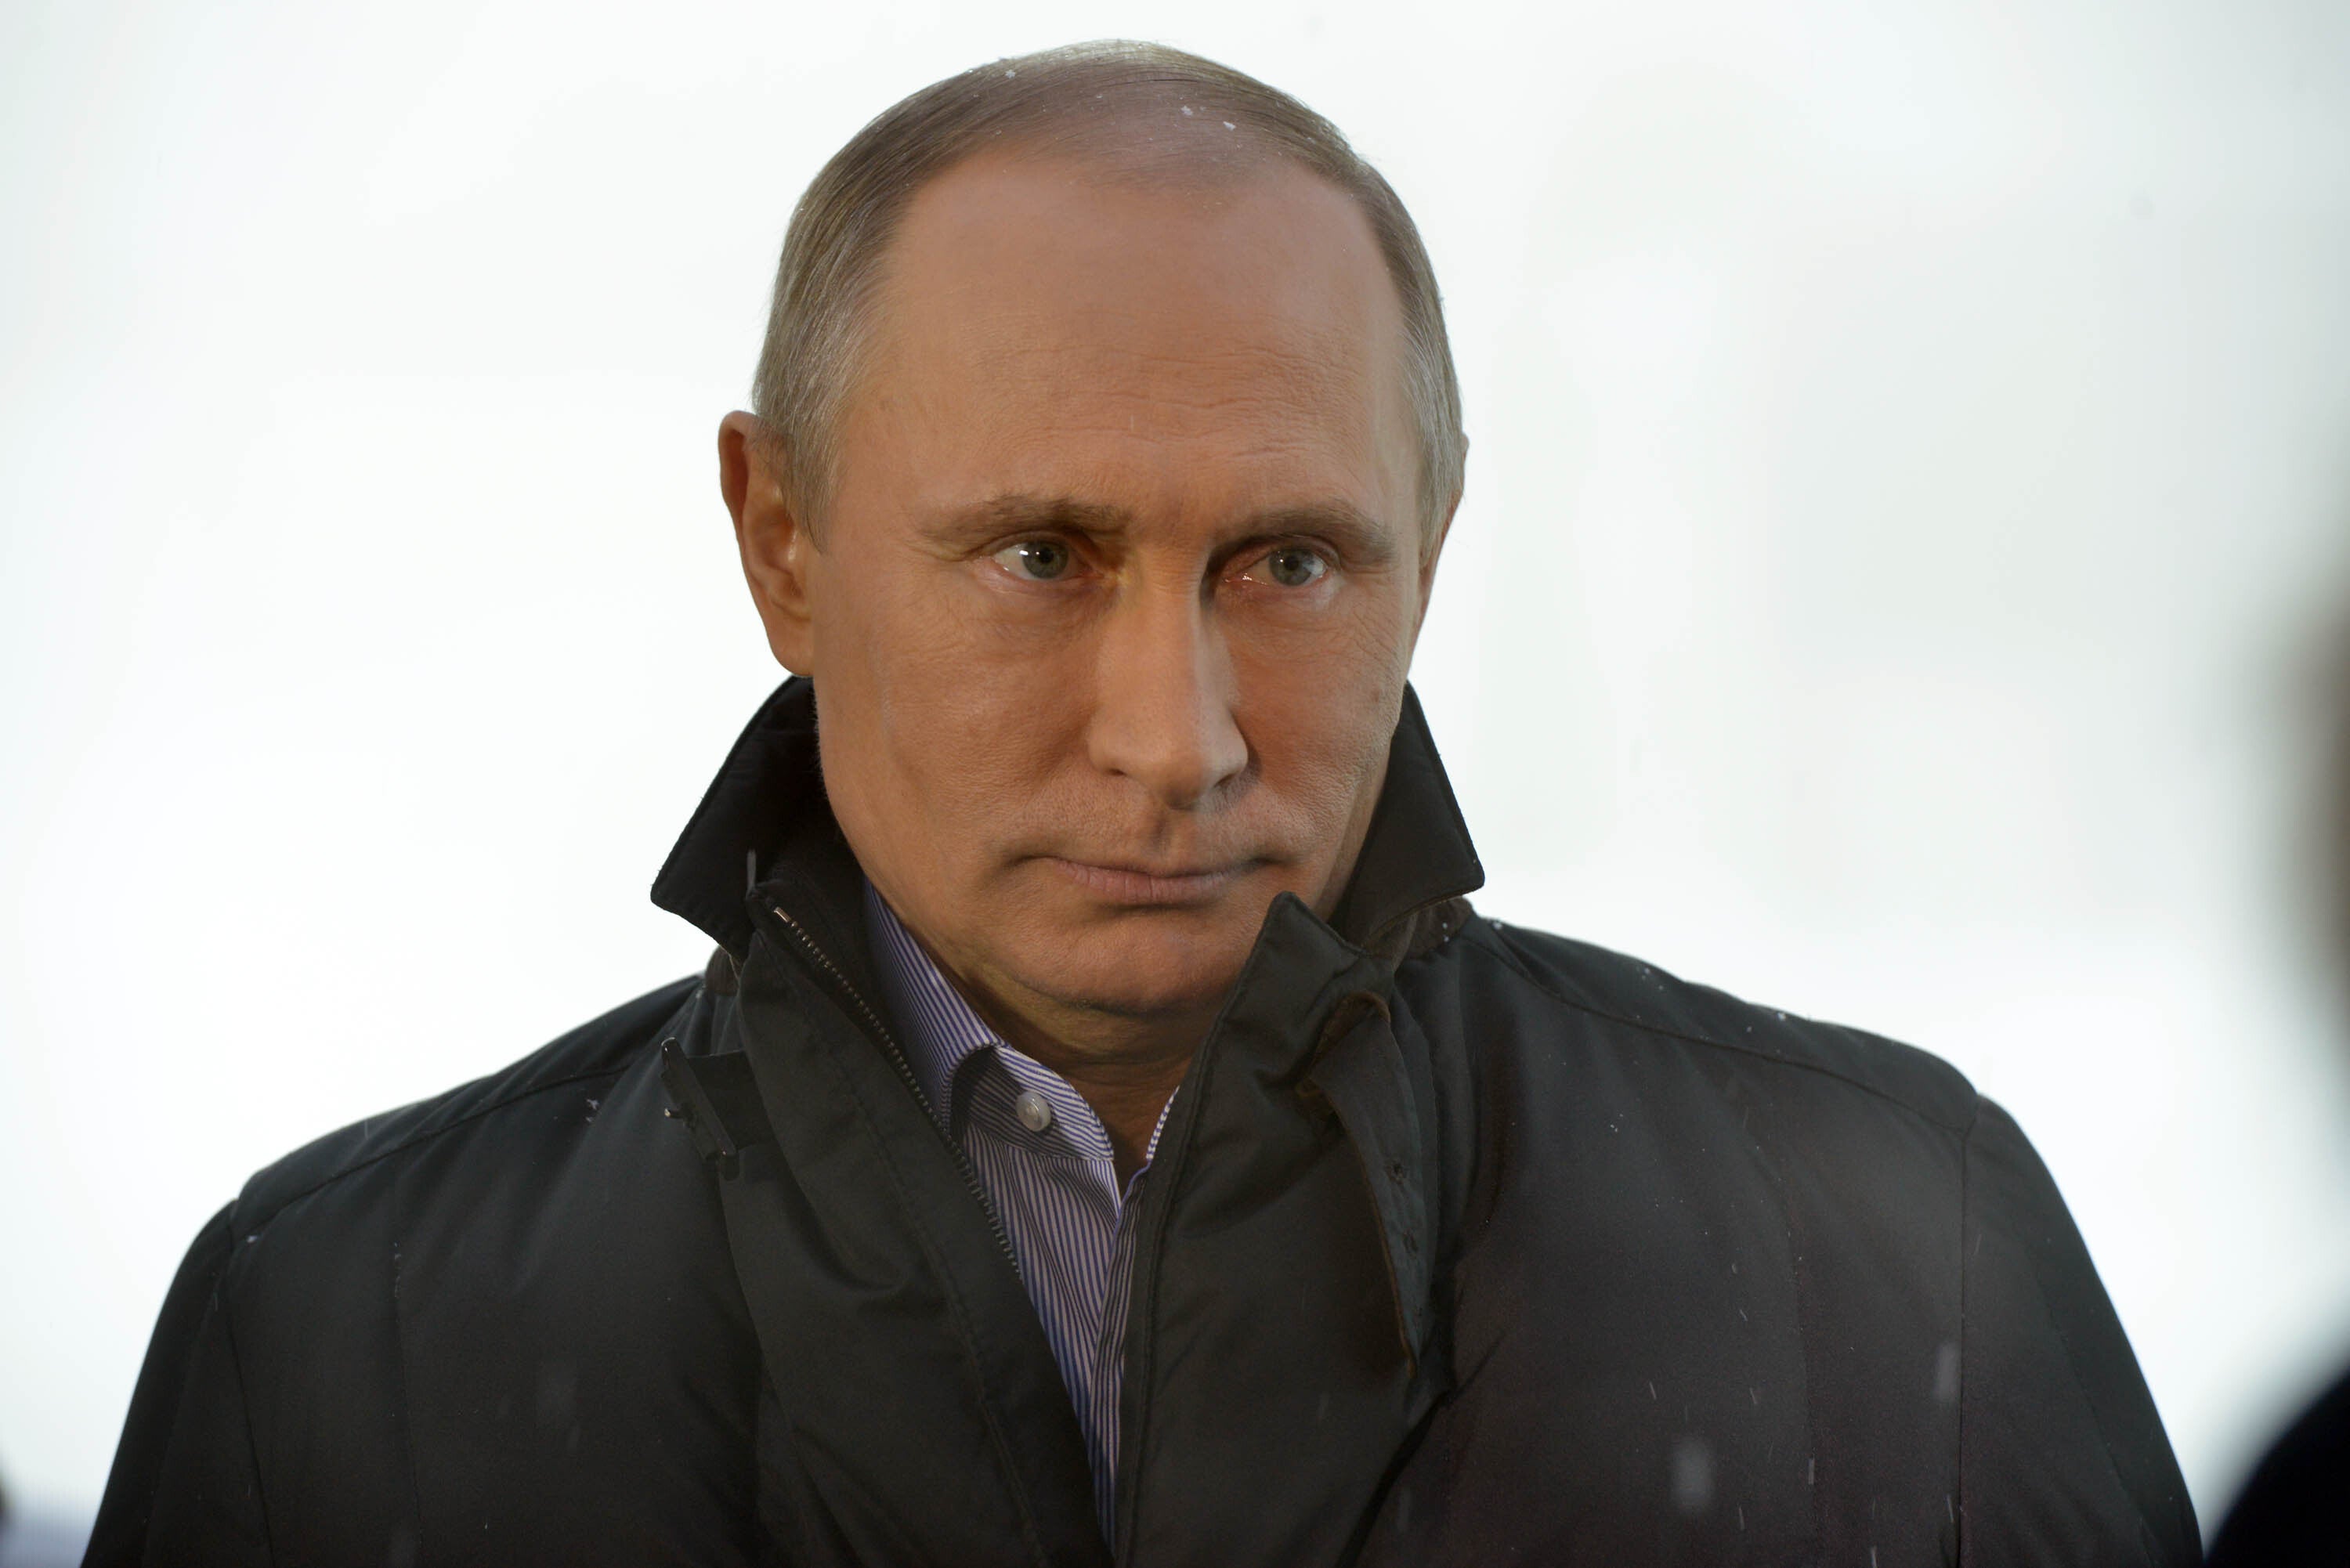 Vladimir Putin has been warned the Kremlin will face ‘sweeping measures’ if he acts against Ukraine (Jeff Overs/BBC/PA)